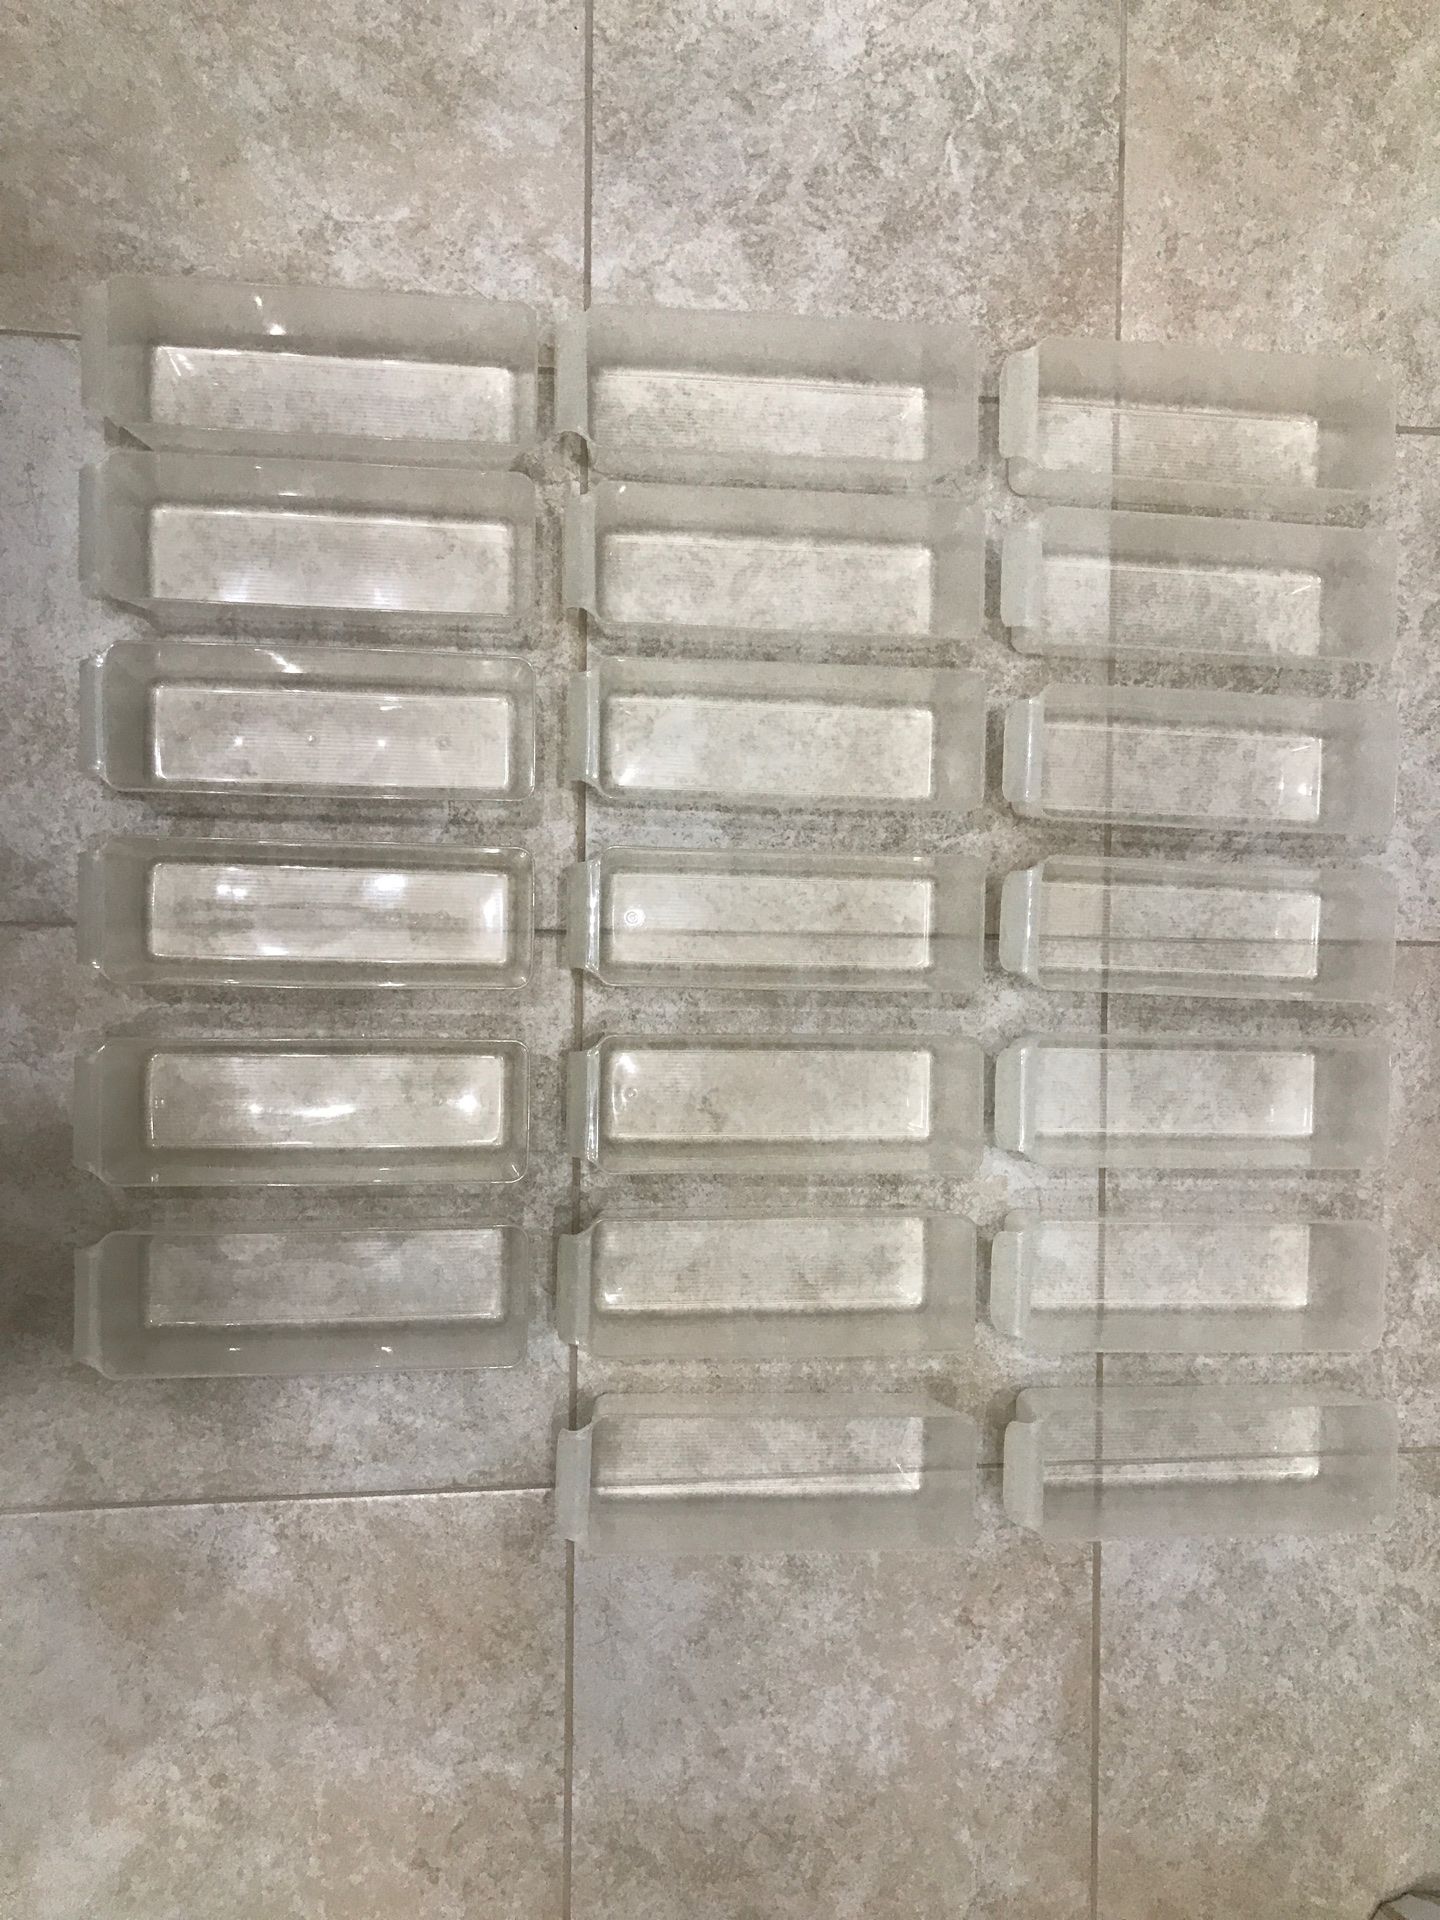 20 Clear Storage Containers